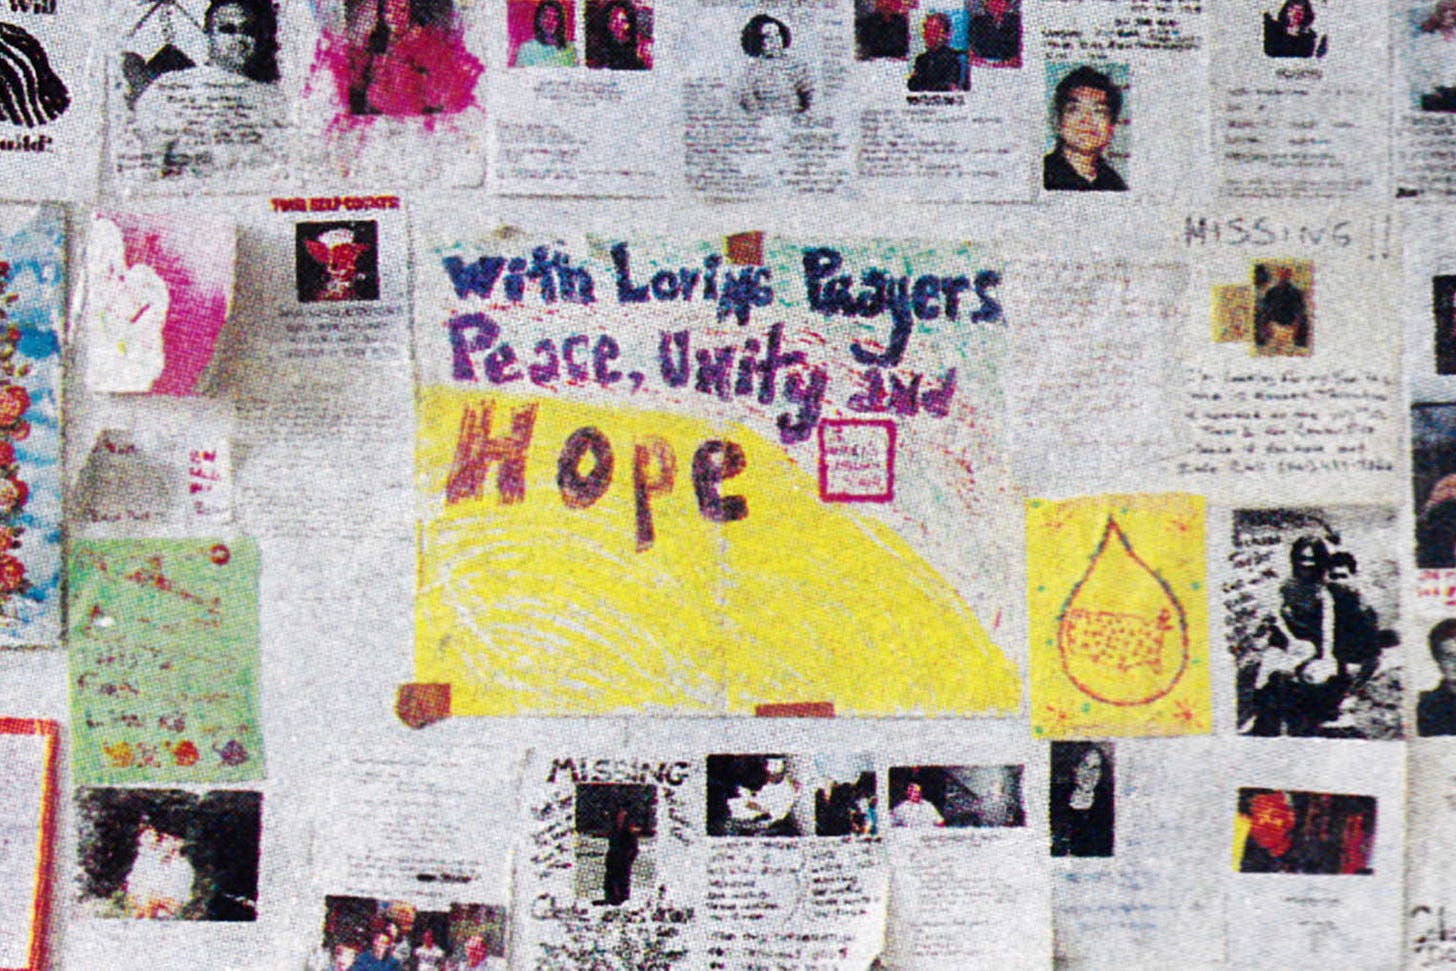 Close-up of a wall papered with flyers for missing 9/11 victims, together with hand-drawn messages of hope and unity.